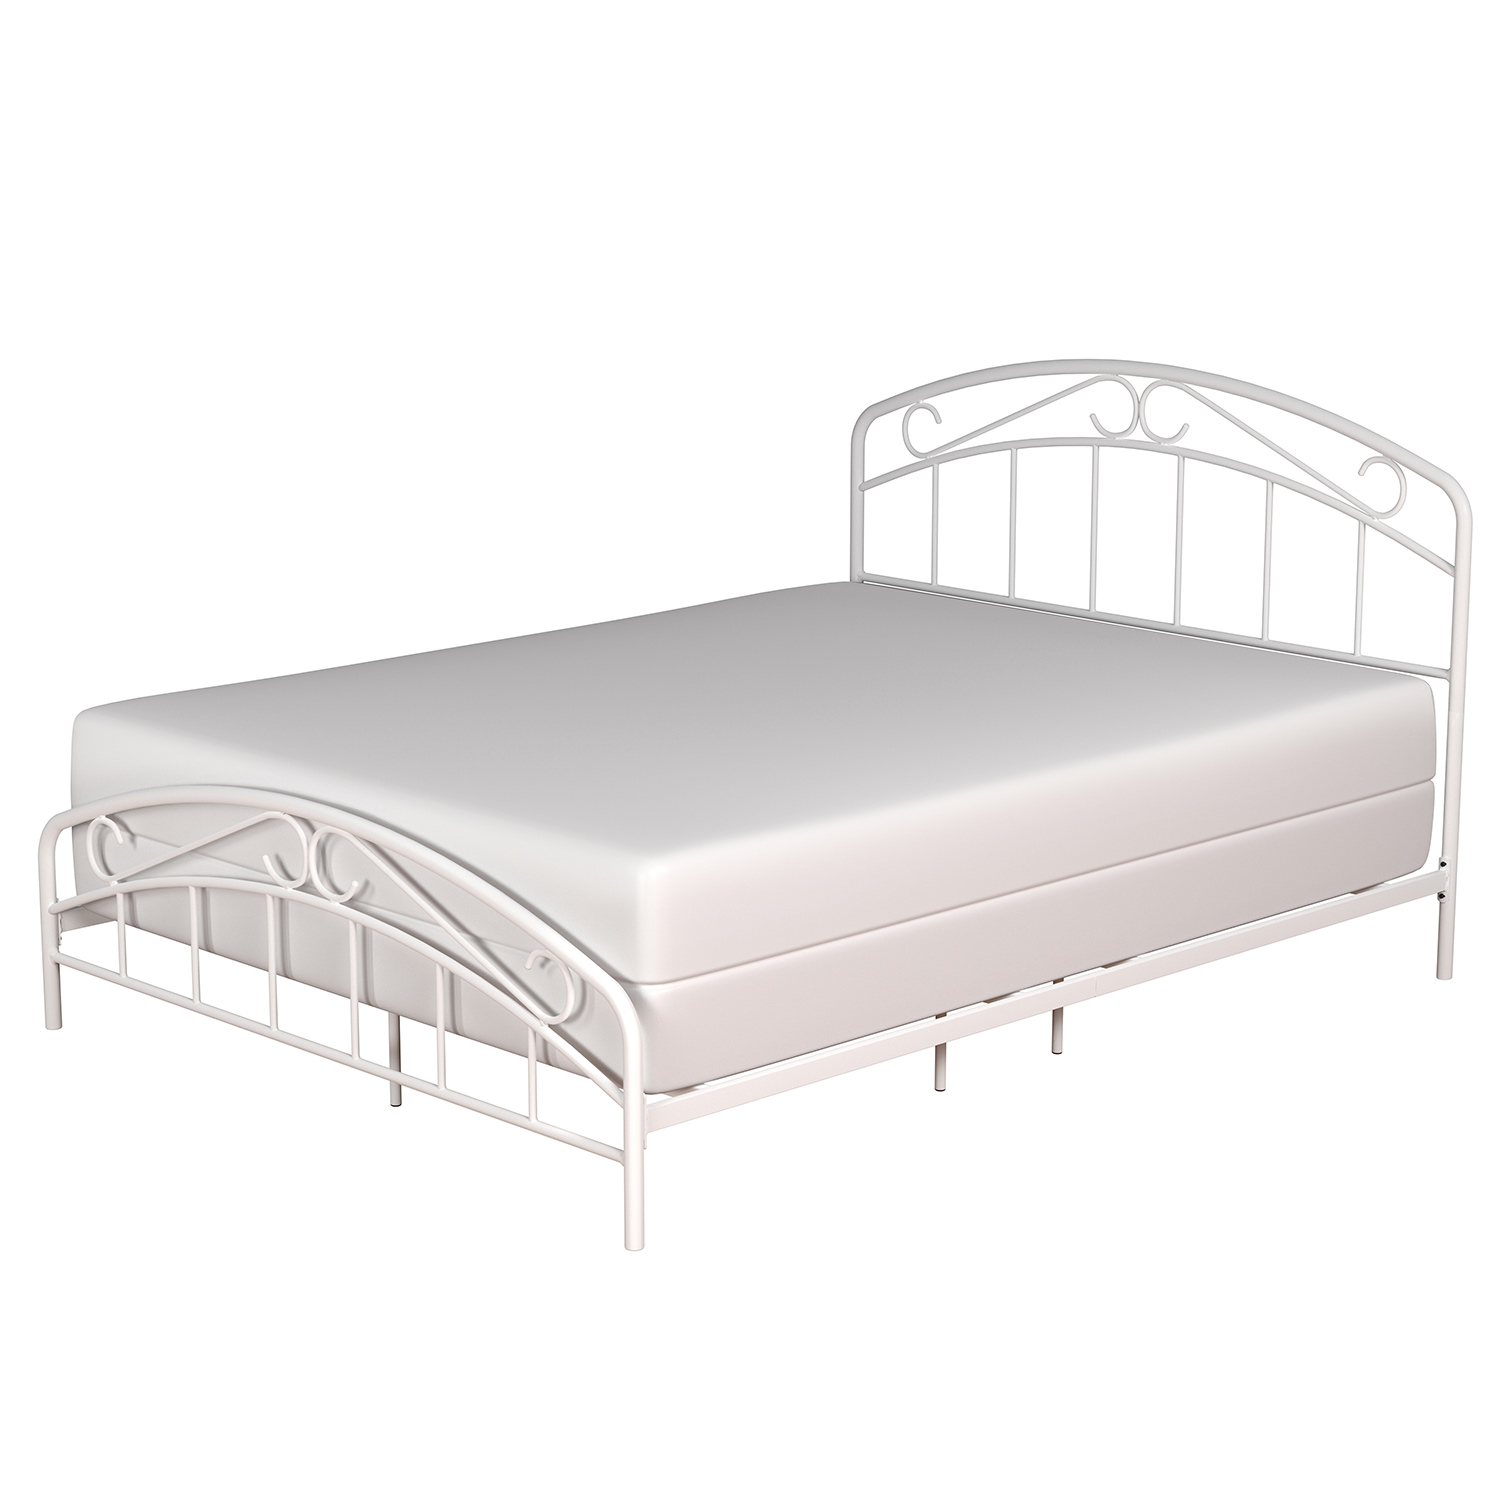 Hillsdale Jolie Metal Bed with Arched Scroll Design - Textured White